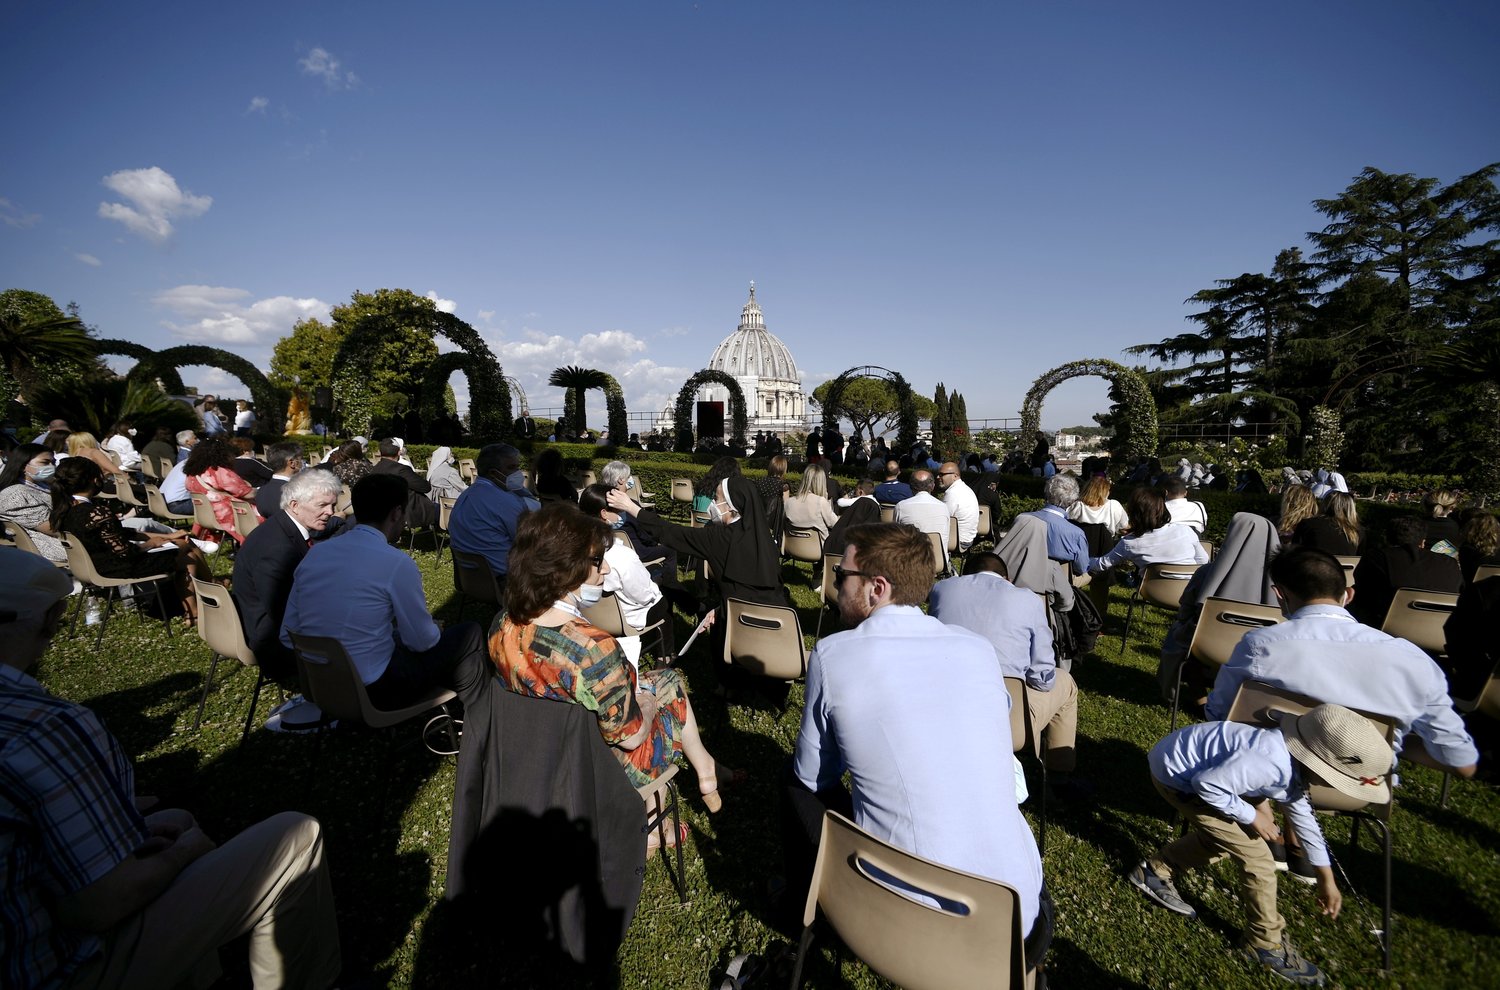 People wait for Pope Francis to arrive for an evening Marian prayer service in the Vatican Gardens May 31, 2021. The serviced finished a monthlong rosary marathon to pray for the end of the COVID-19 pandemic. (CNS photo/Filippo Monteforte, Reuters pool)